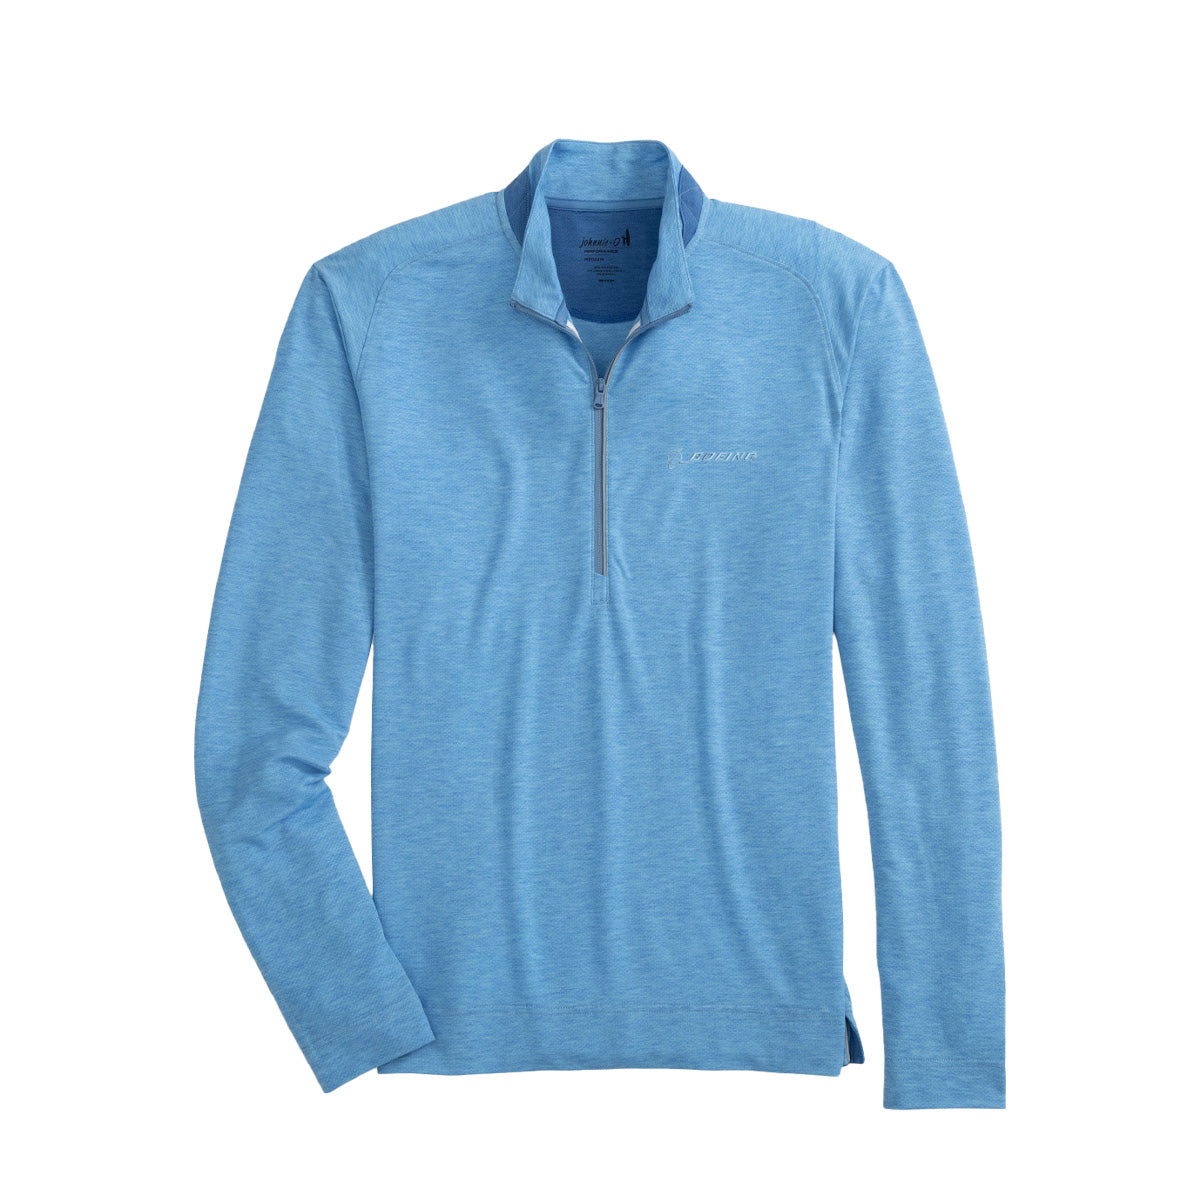 Full product image of the quarter-zip in a riviera blue color.  Blue Boeing logo on left chest.